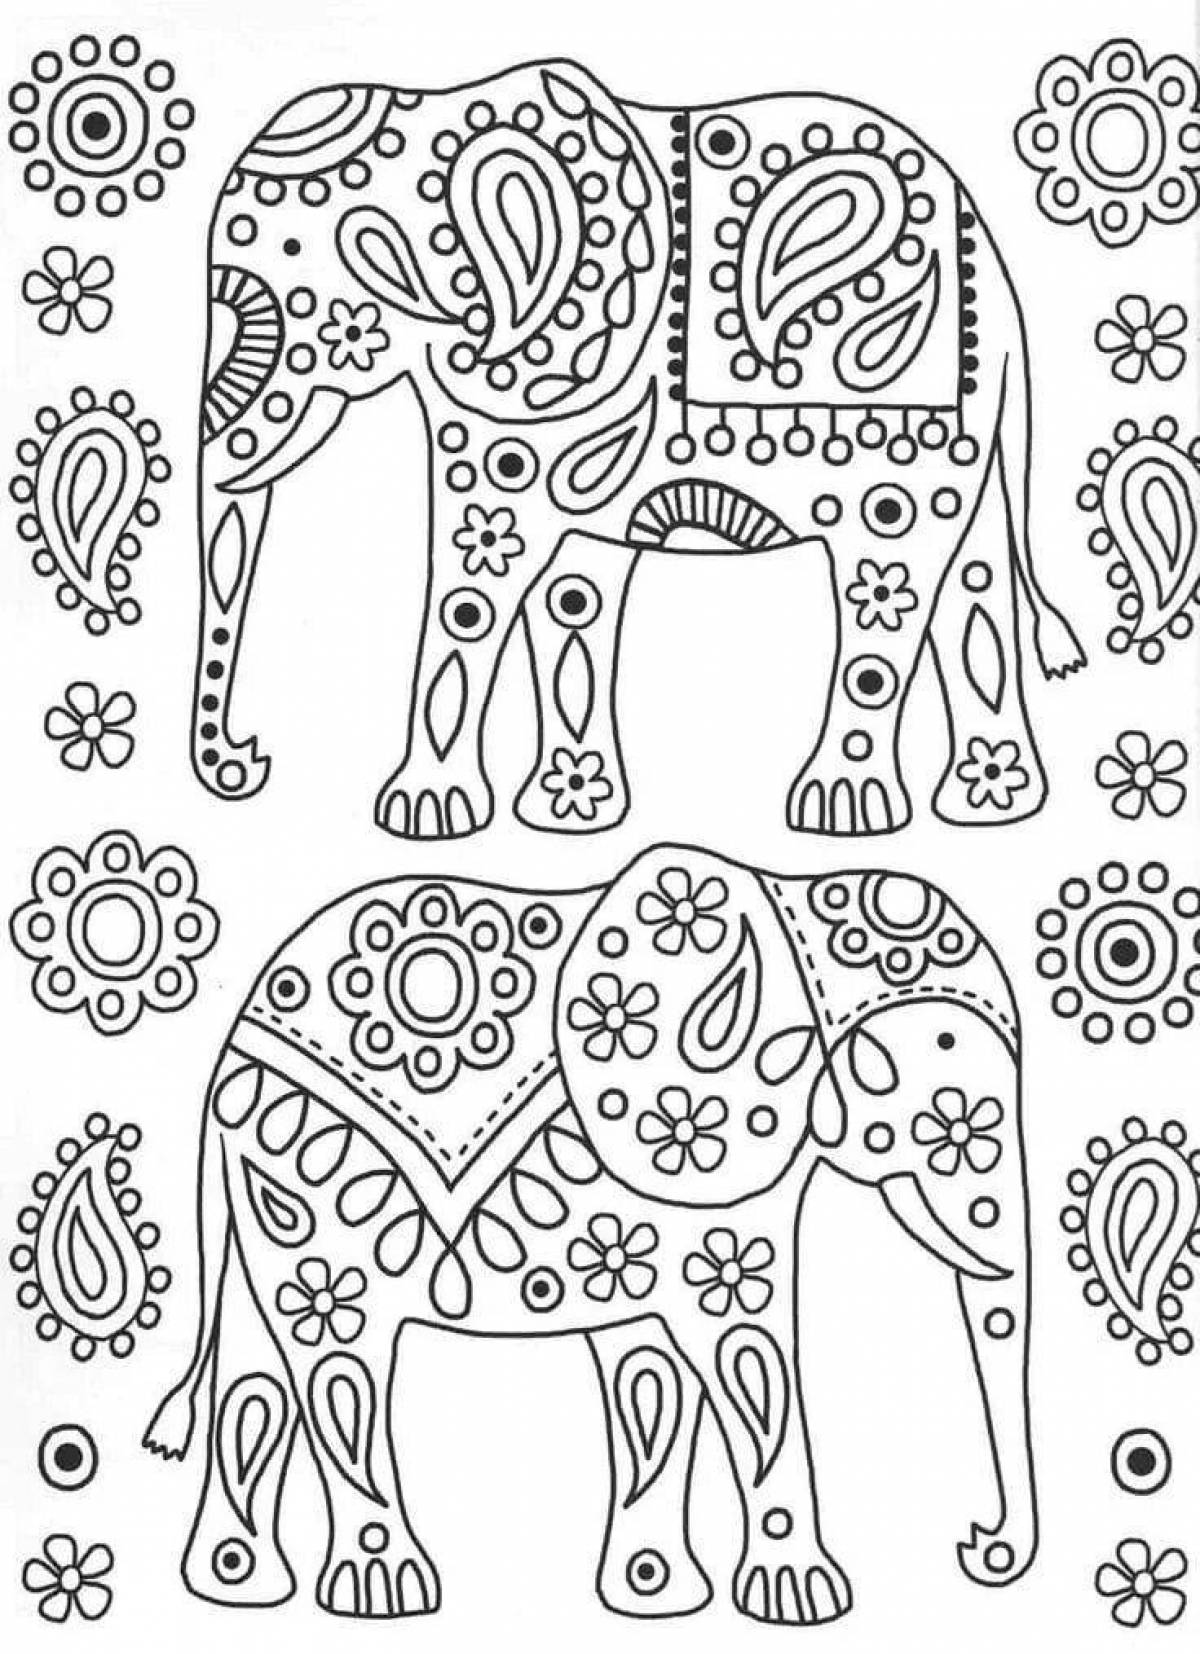 Sublime coloring page indian elephant